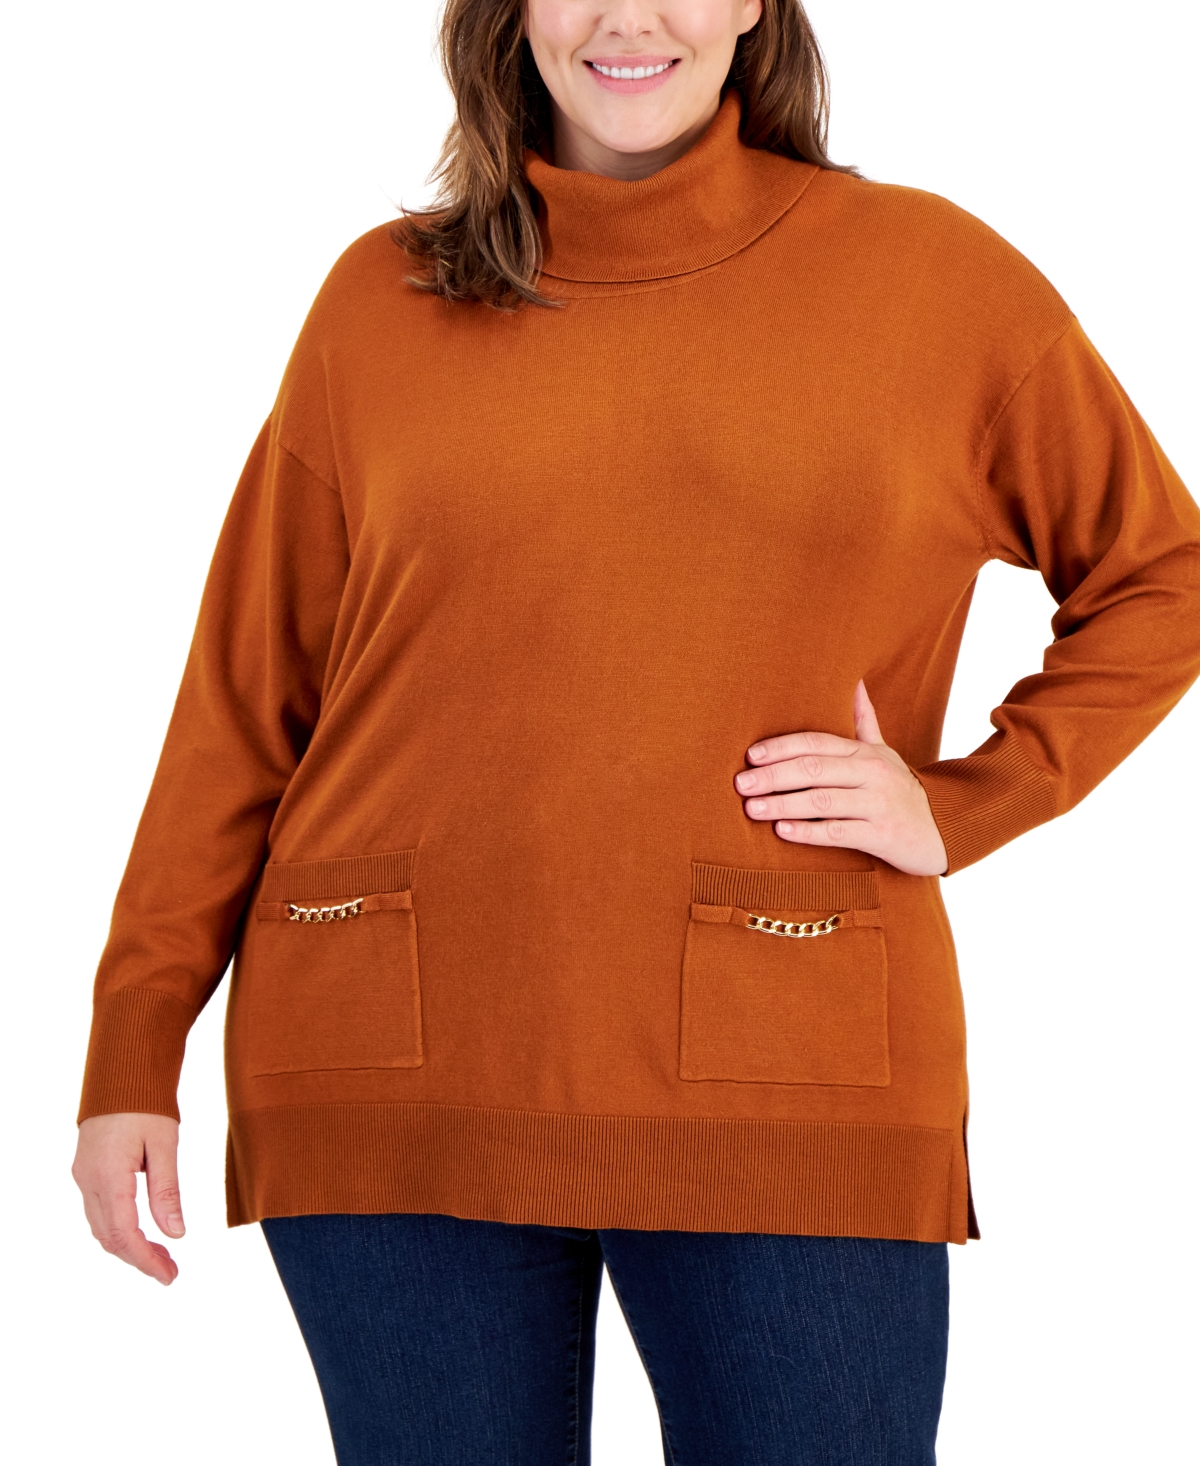 Jm Collection Plus Size Chain-Trim Turtleneck Sweater, Created for Macy's